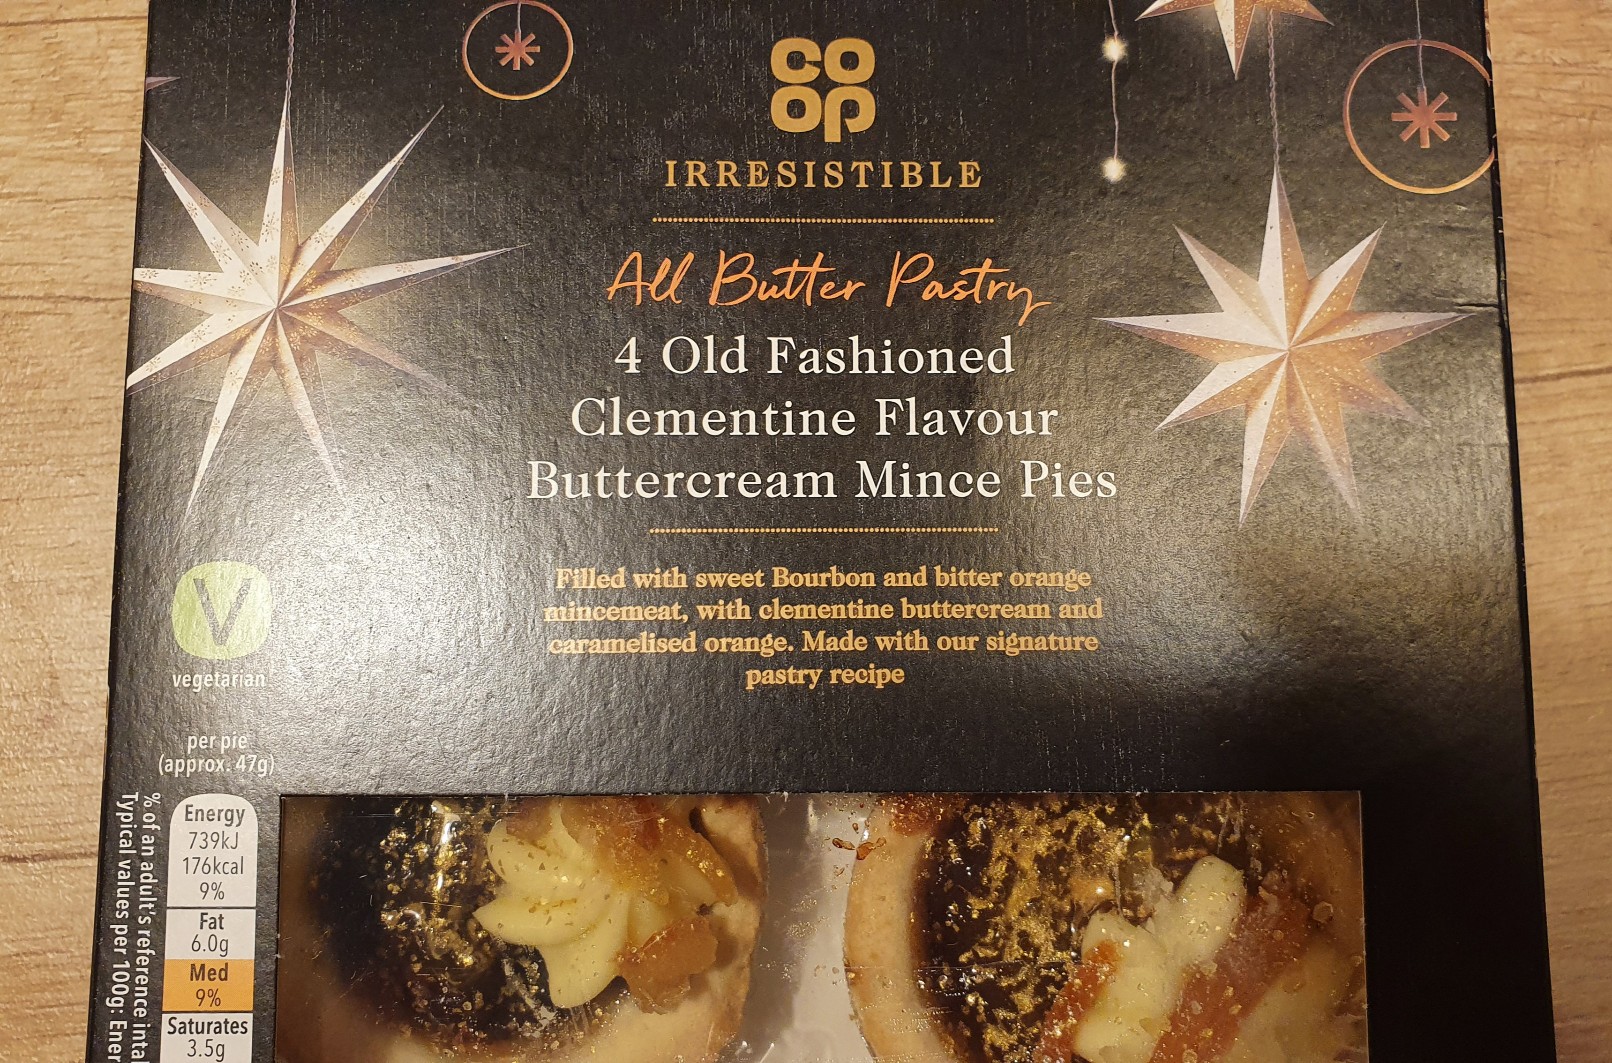 Co-op Old Fashioned Clementine Flavour Buttercream Mince Pie Review 2020